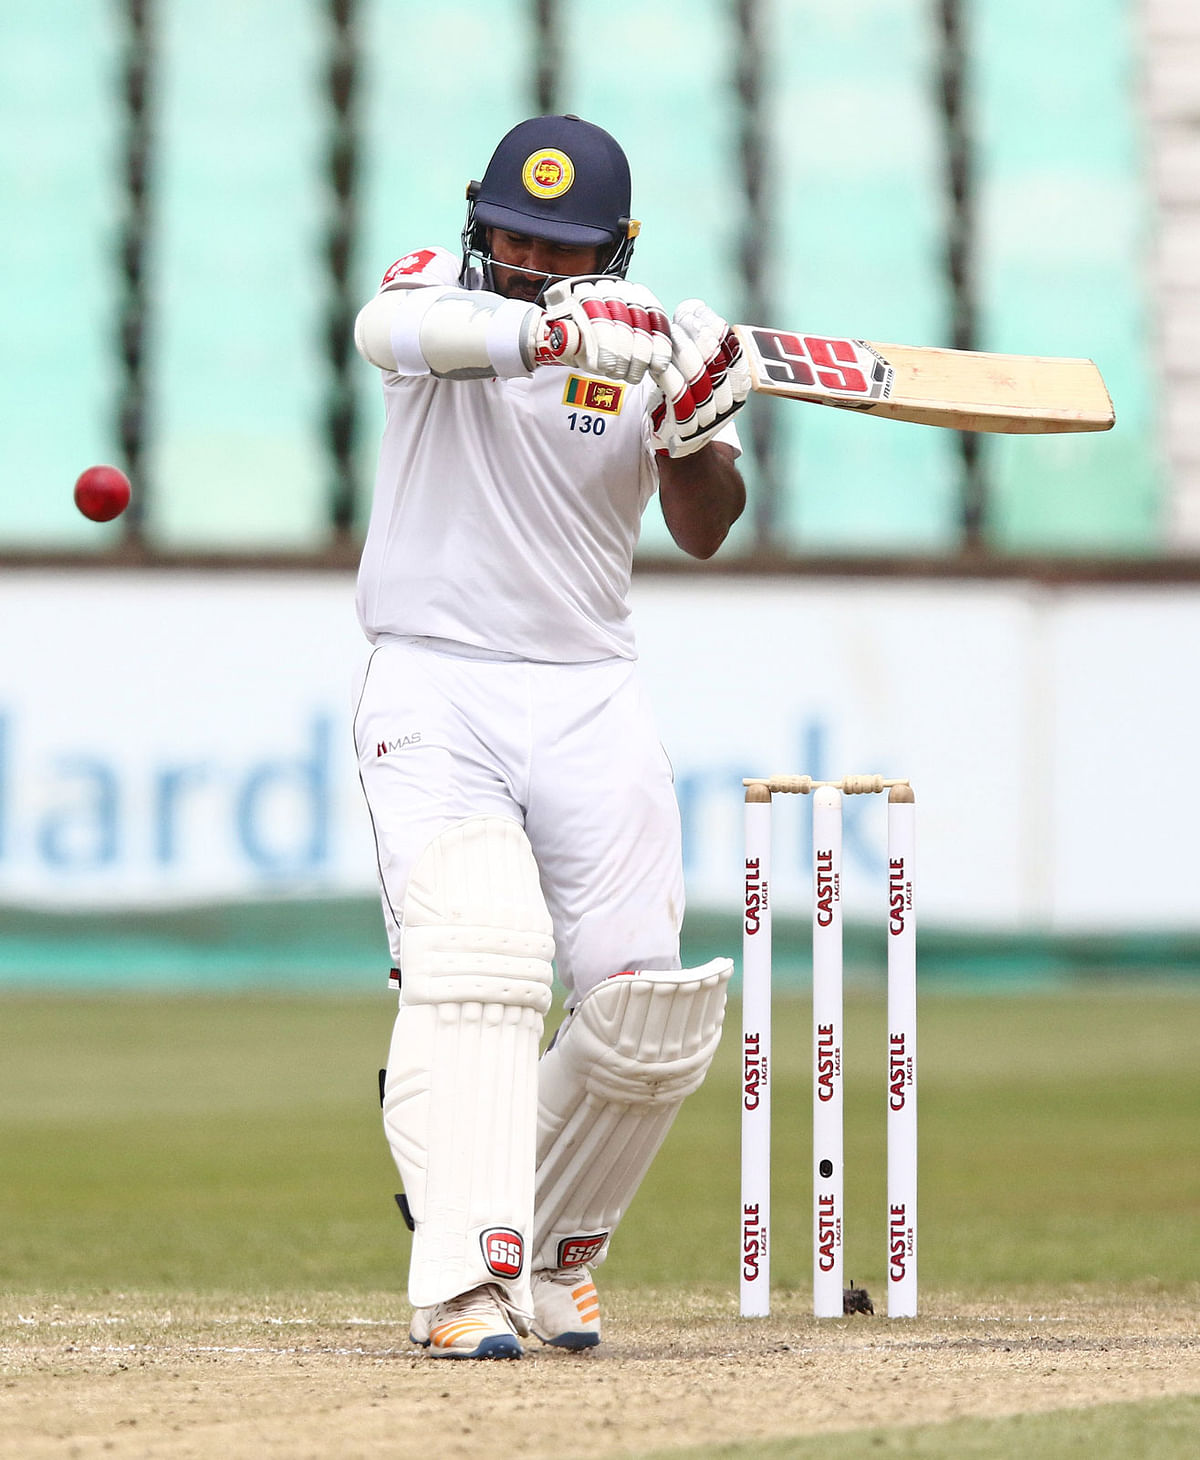 Sri Lankas Kusal Perera bats during the fourth day of the first Cricket Test between South Africa and Sri Lanka at the Kingsmead Stadium in Durban on 16 February, 2019. Photo: AFP